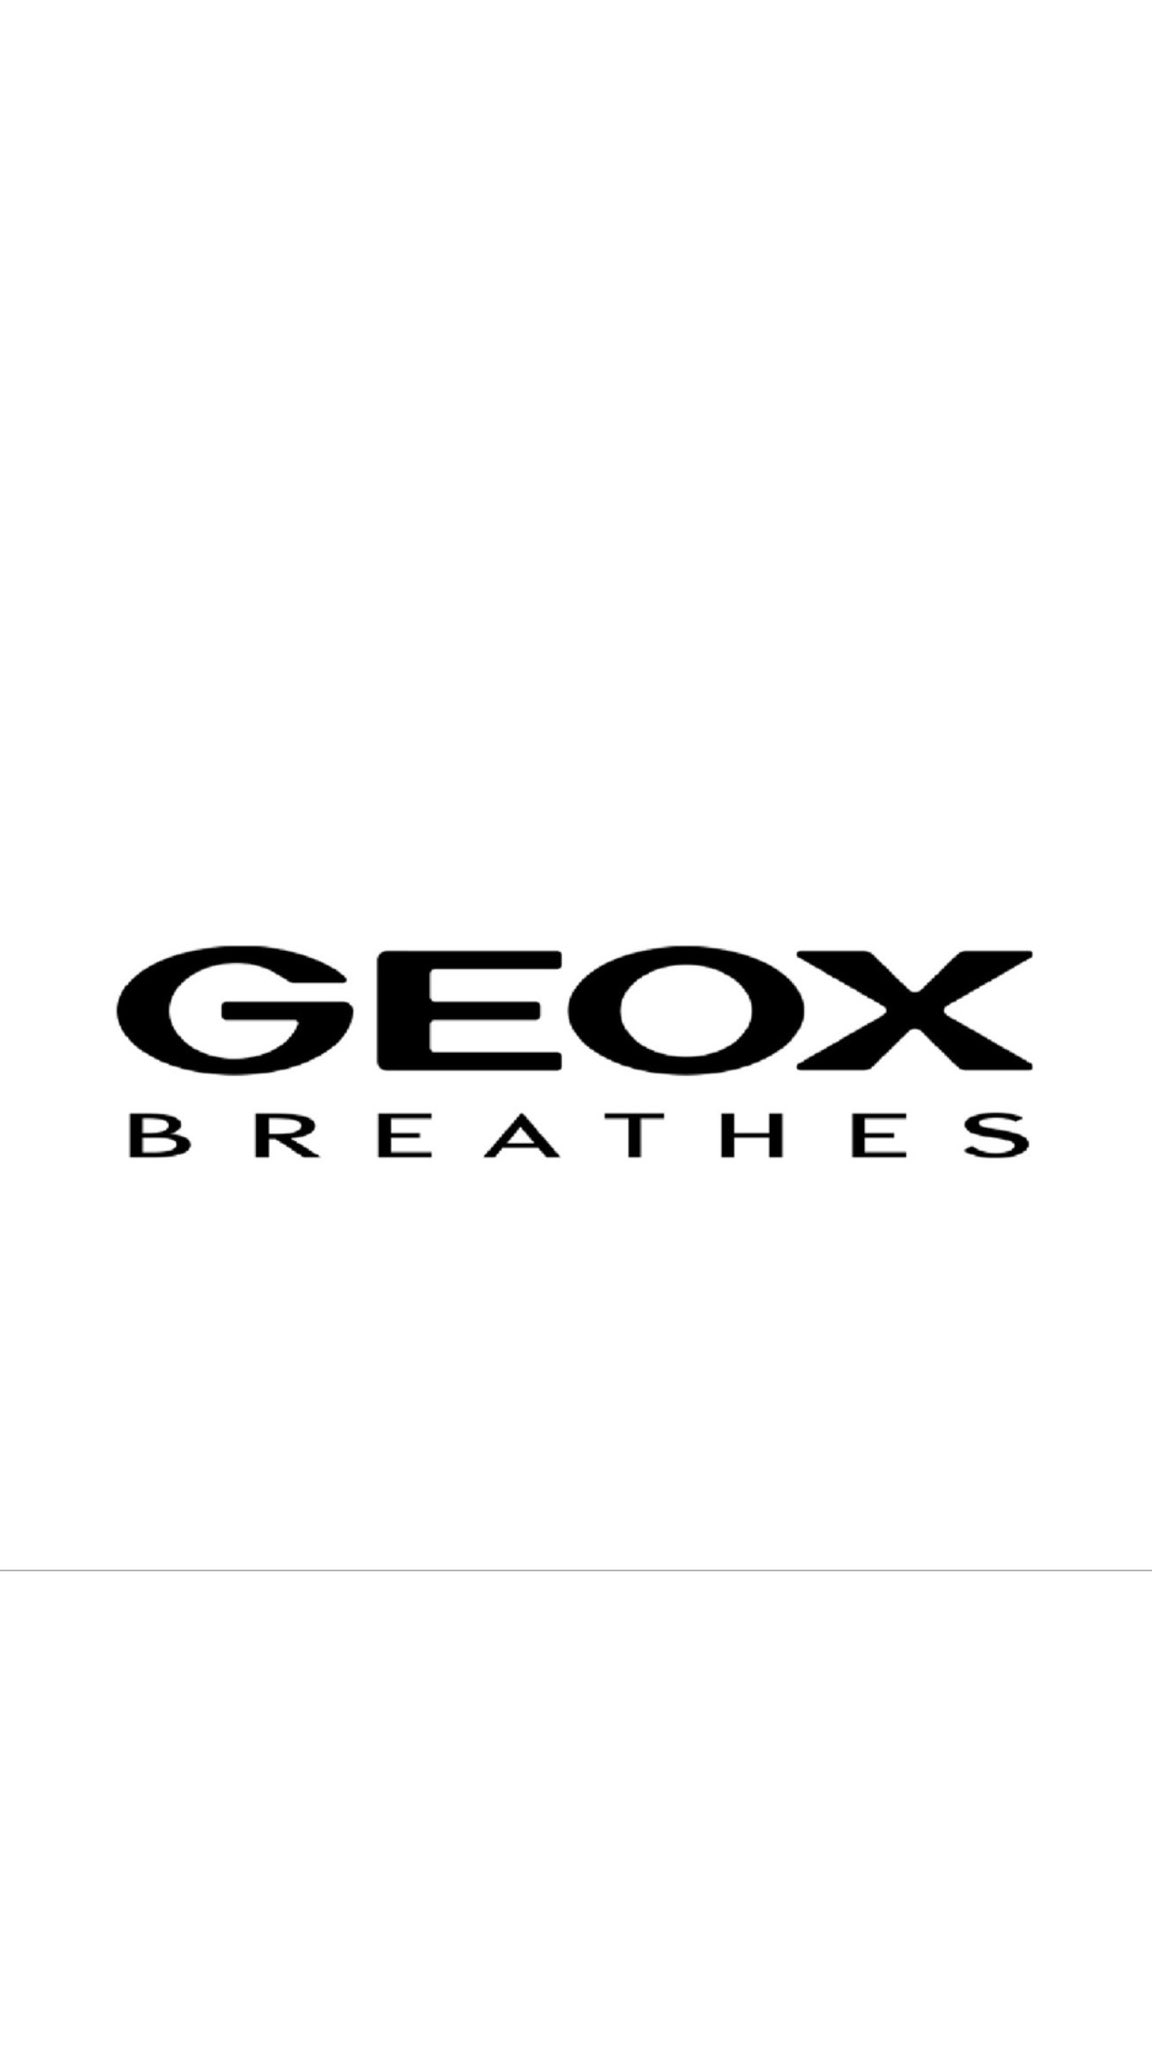 Donation Parcel Cable car Browns Dept Stores on Twitter: "🧥New GEOX Breathes Auntumn/Winter  collection at Browns!🧥 #geoxbreathes #geox #brownsdepartmentstores  #auntumn/winter https://t.co/9H13yNNtG8" / Twitter